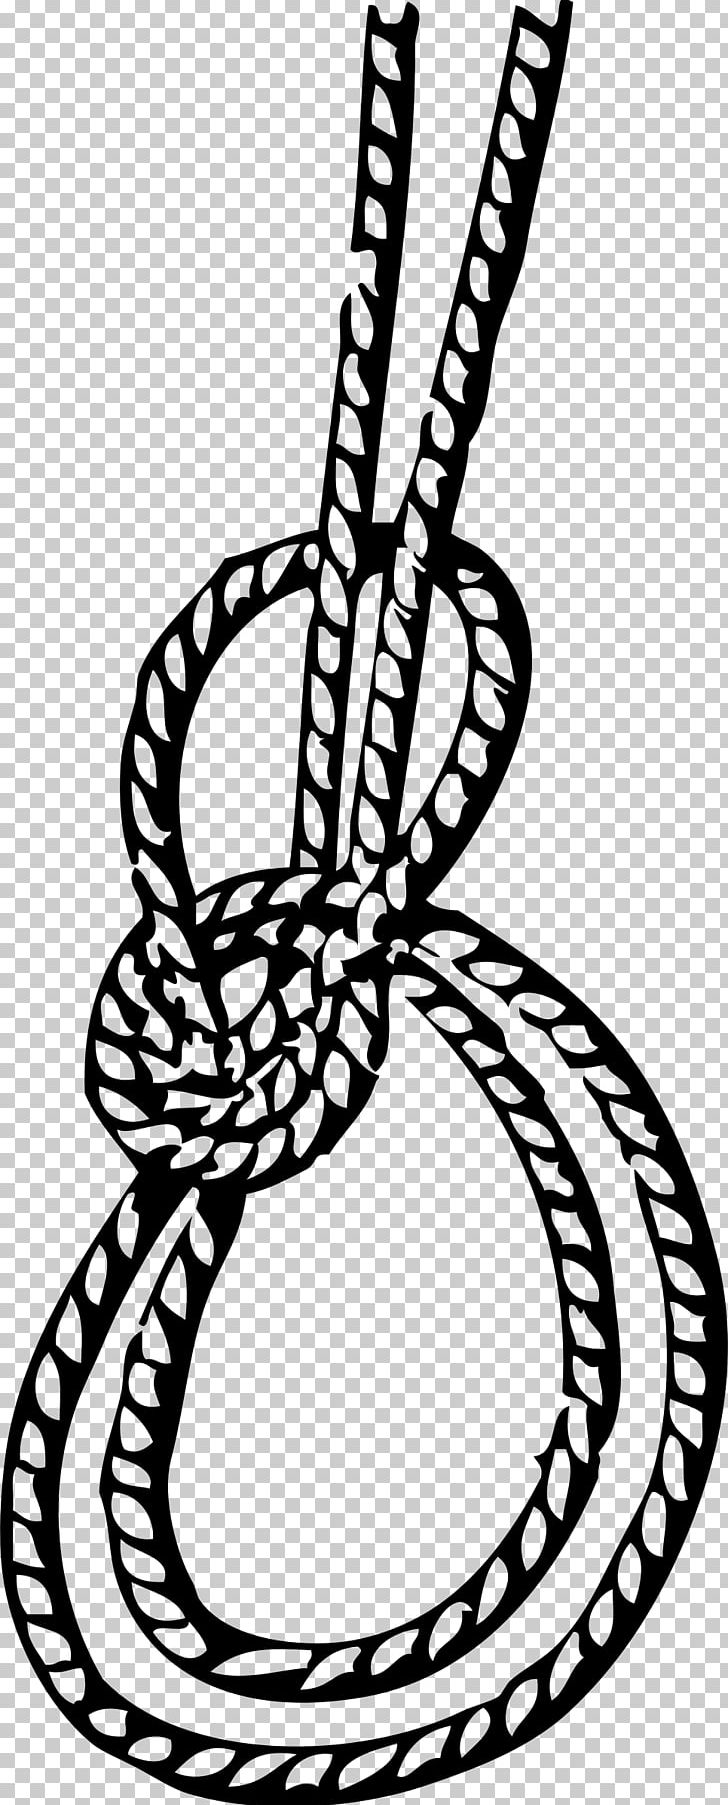 Bowline On A Bight Knot Running Bowline PNG, Clipart, Bight, Black And White, Bowline, Bowline On A Bight, Circle Free PNG Download